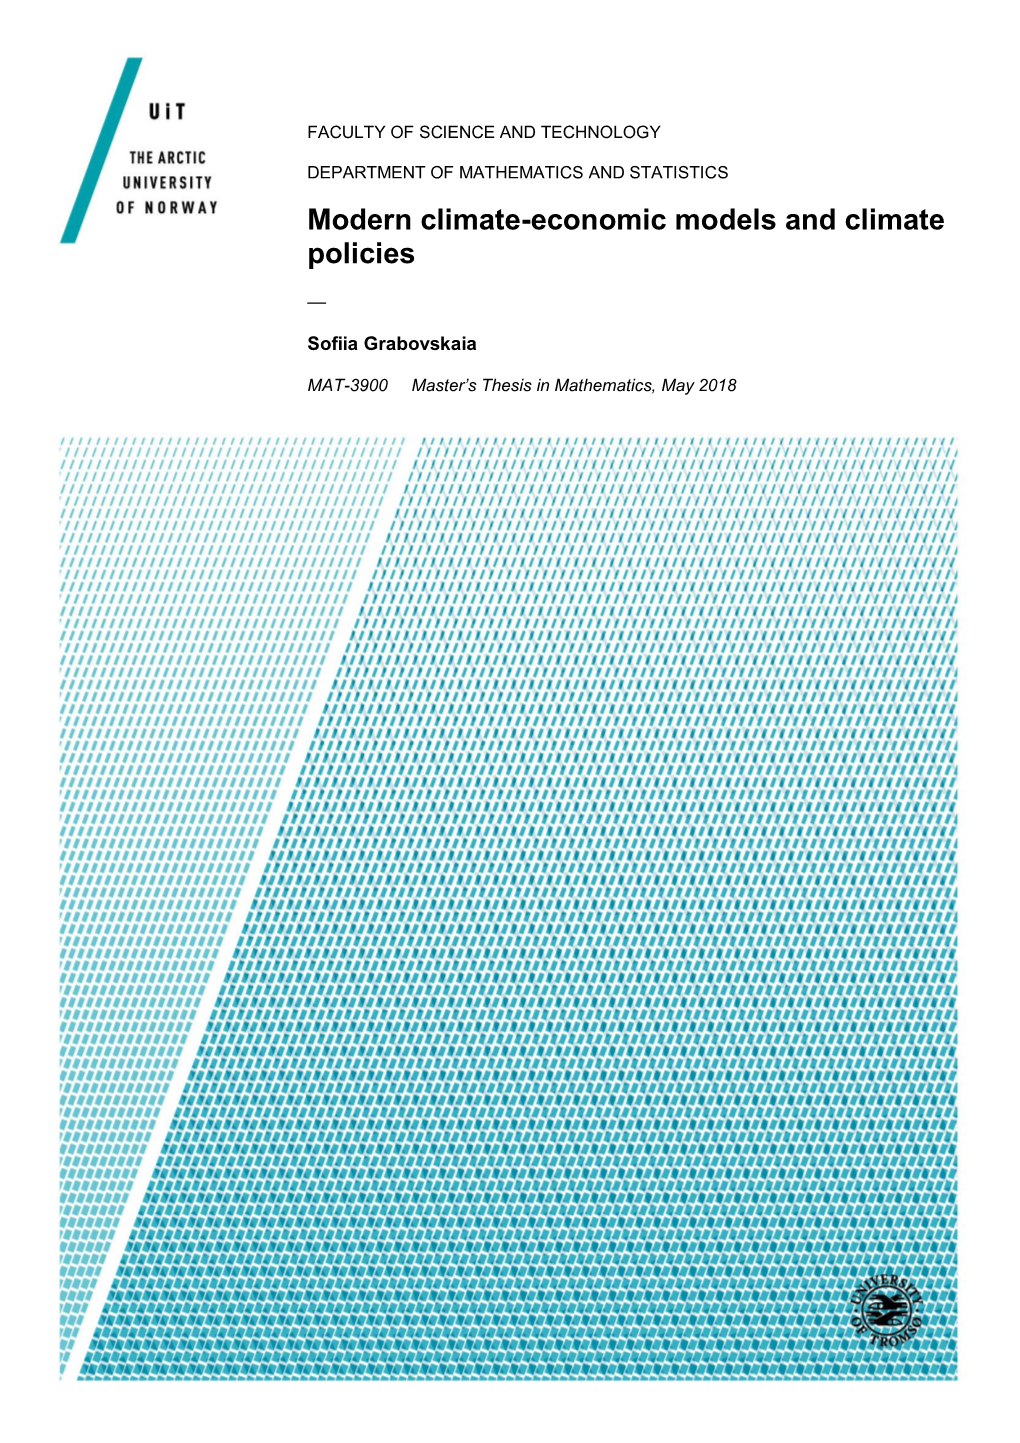 Modern Climate-Economic Models and Climate Policies